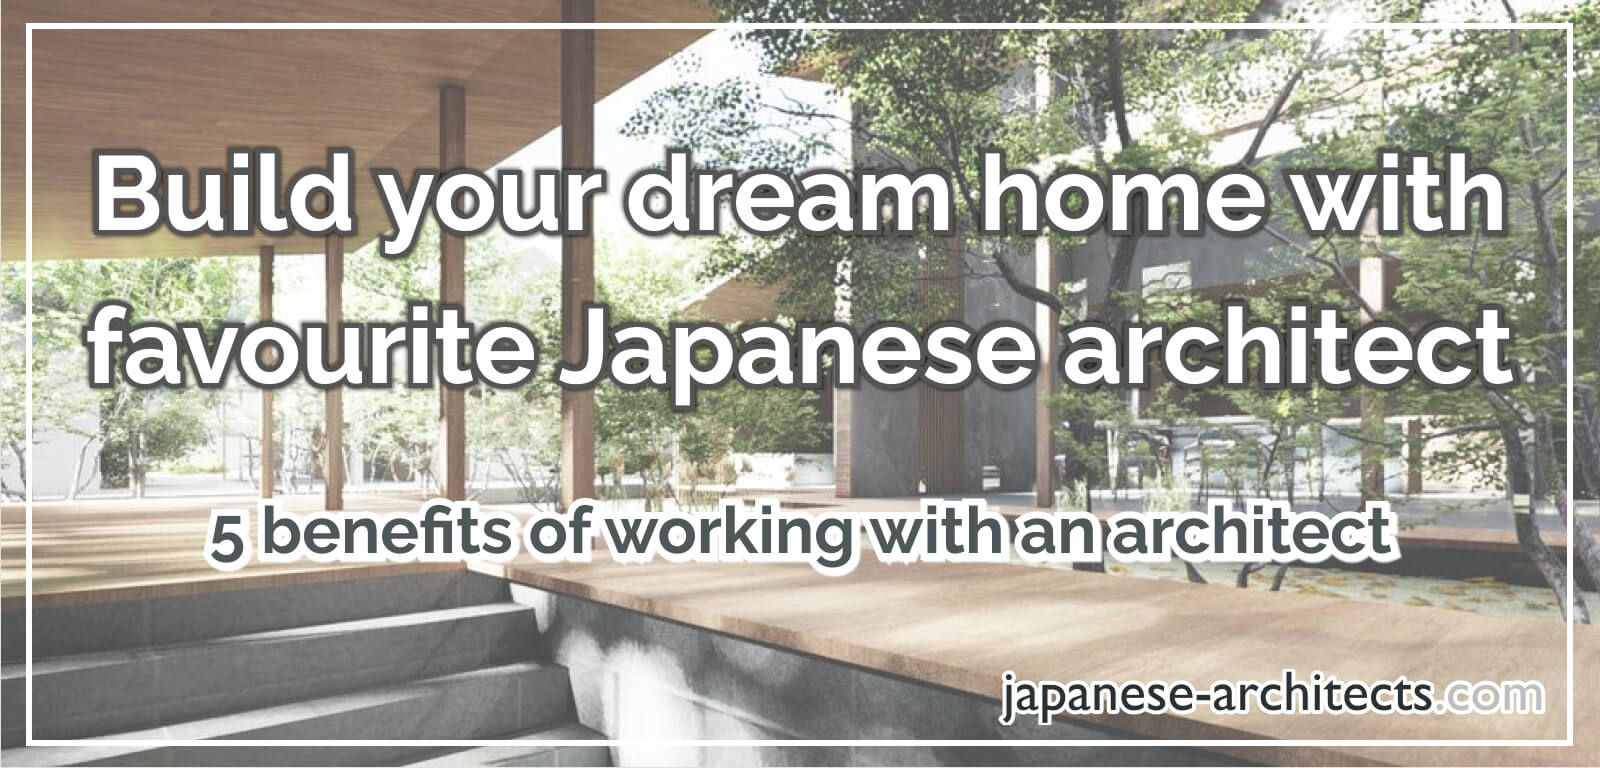 Build your dream home with your favourite Japanese architect